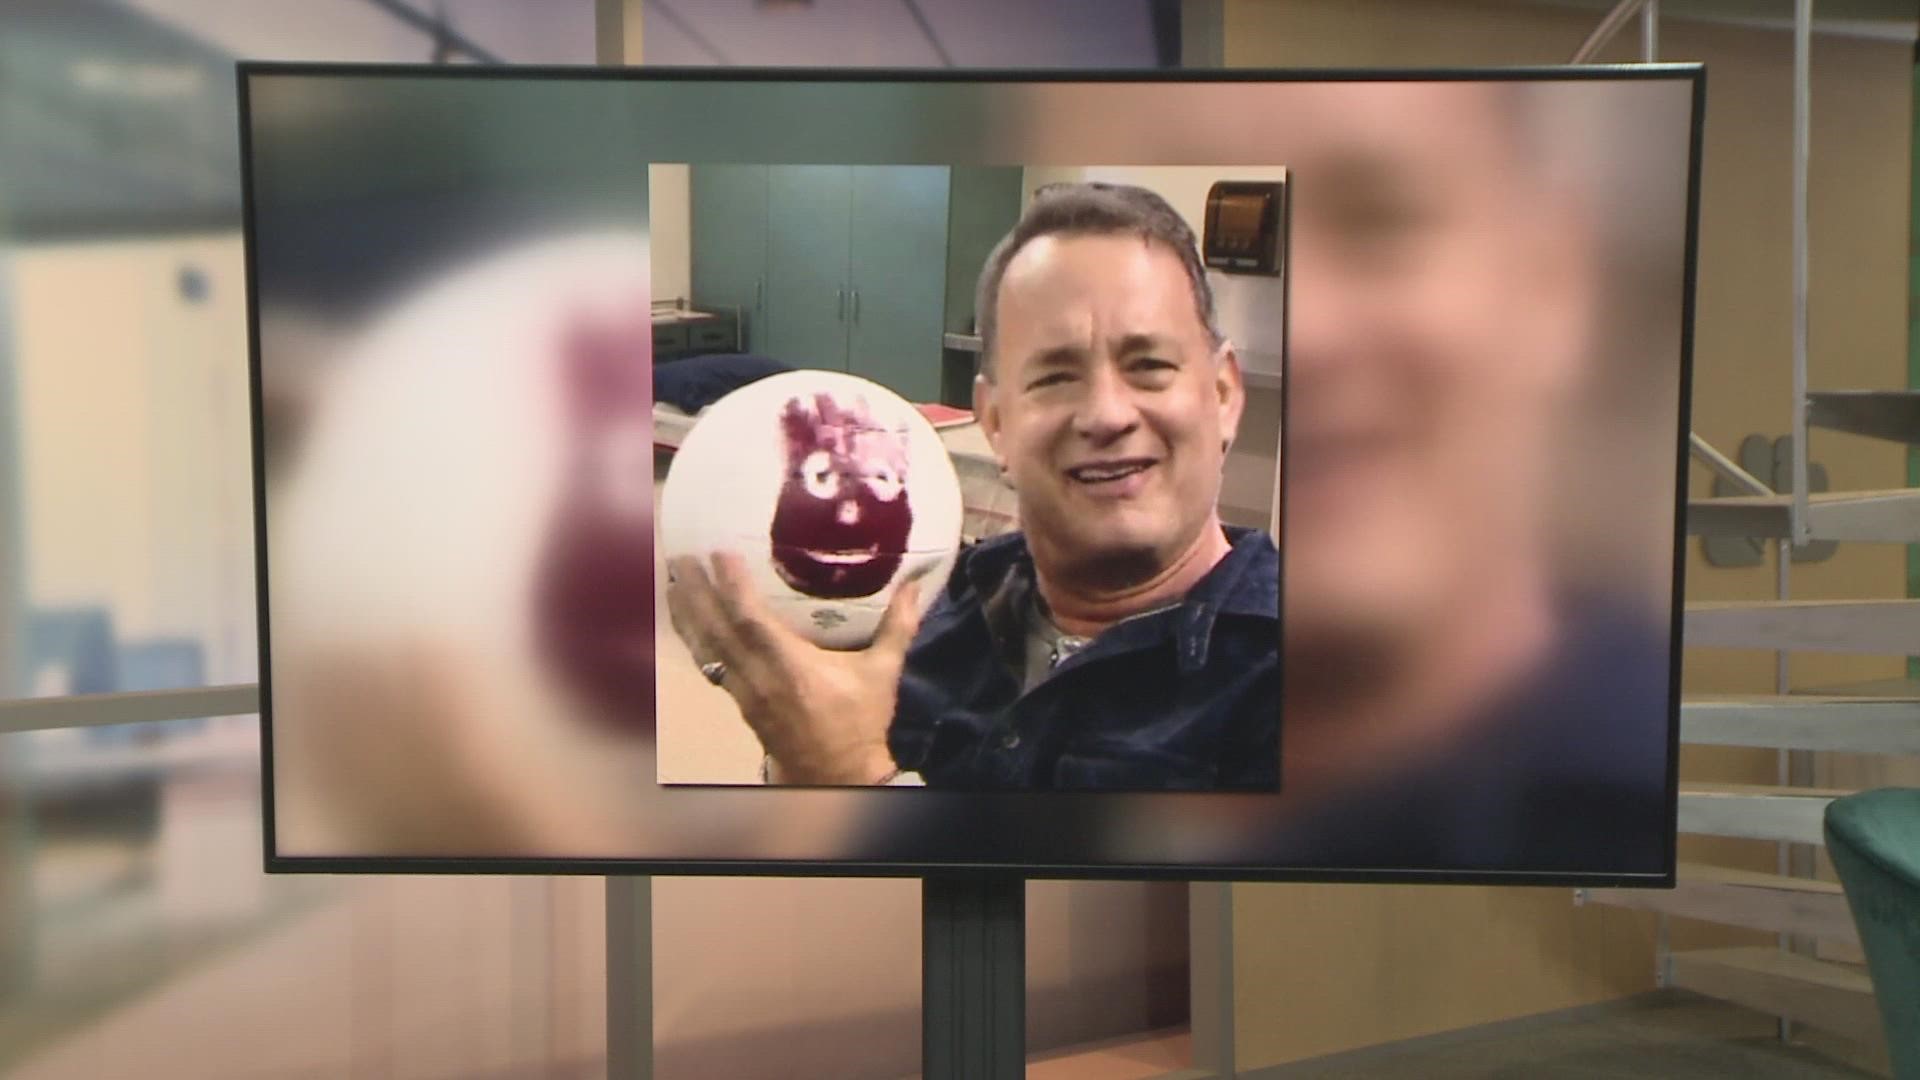 Ahead of Hanks' appearance at "From Cleveland, For Cleveland" in November, the two-time Oscar winner has donated an autographed 'Wilson' volleyball for a raffle.